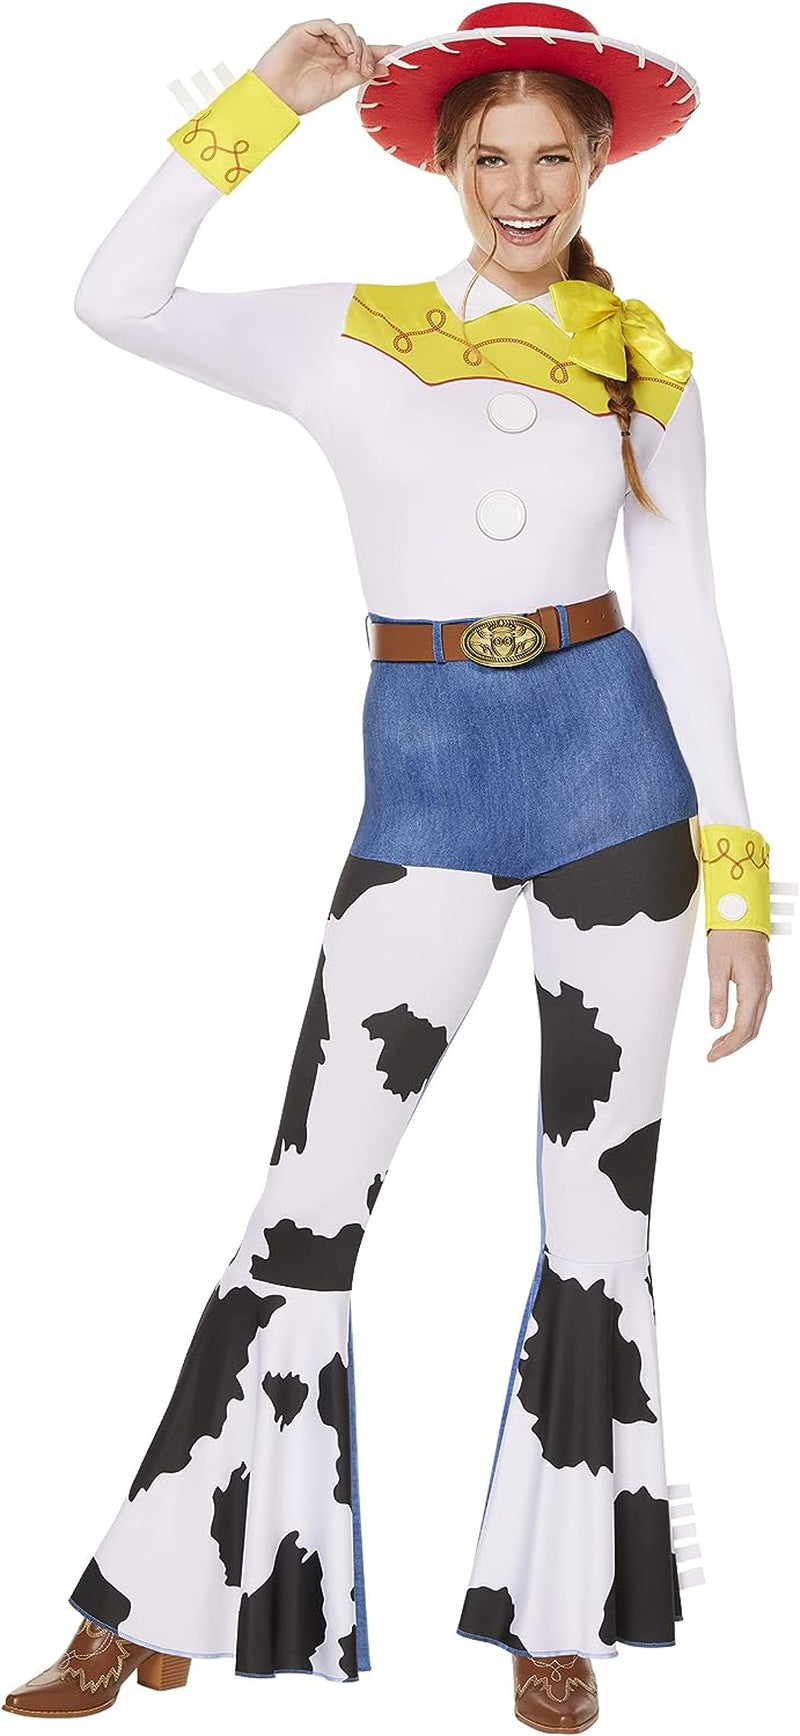 Spirit Halloween Toy Story Adult Jessie Costume | Officially Licensed | Group Costume | Pixar | Cowgirl Cosplay  Spirit Halloween   